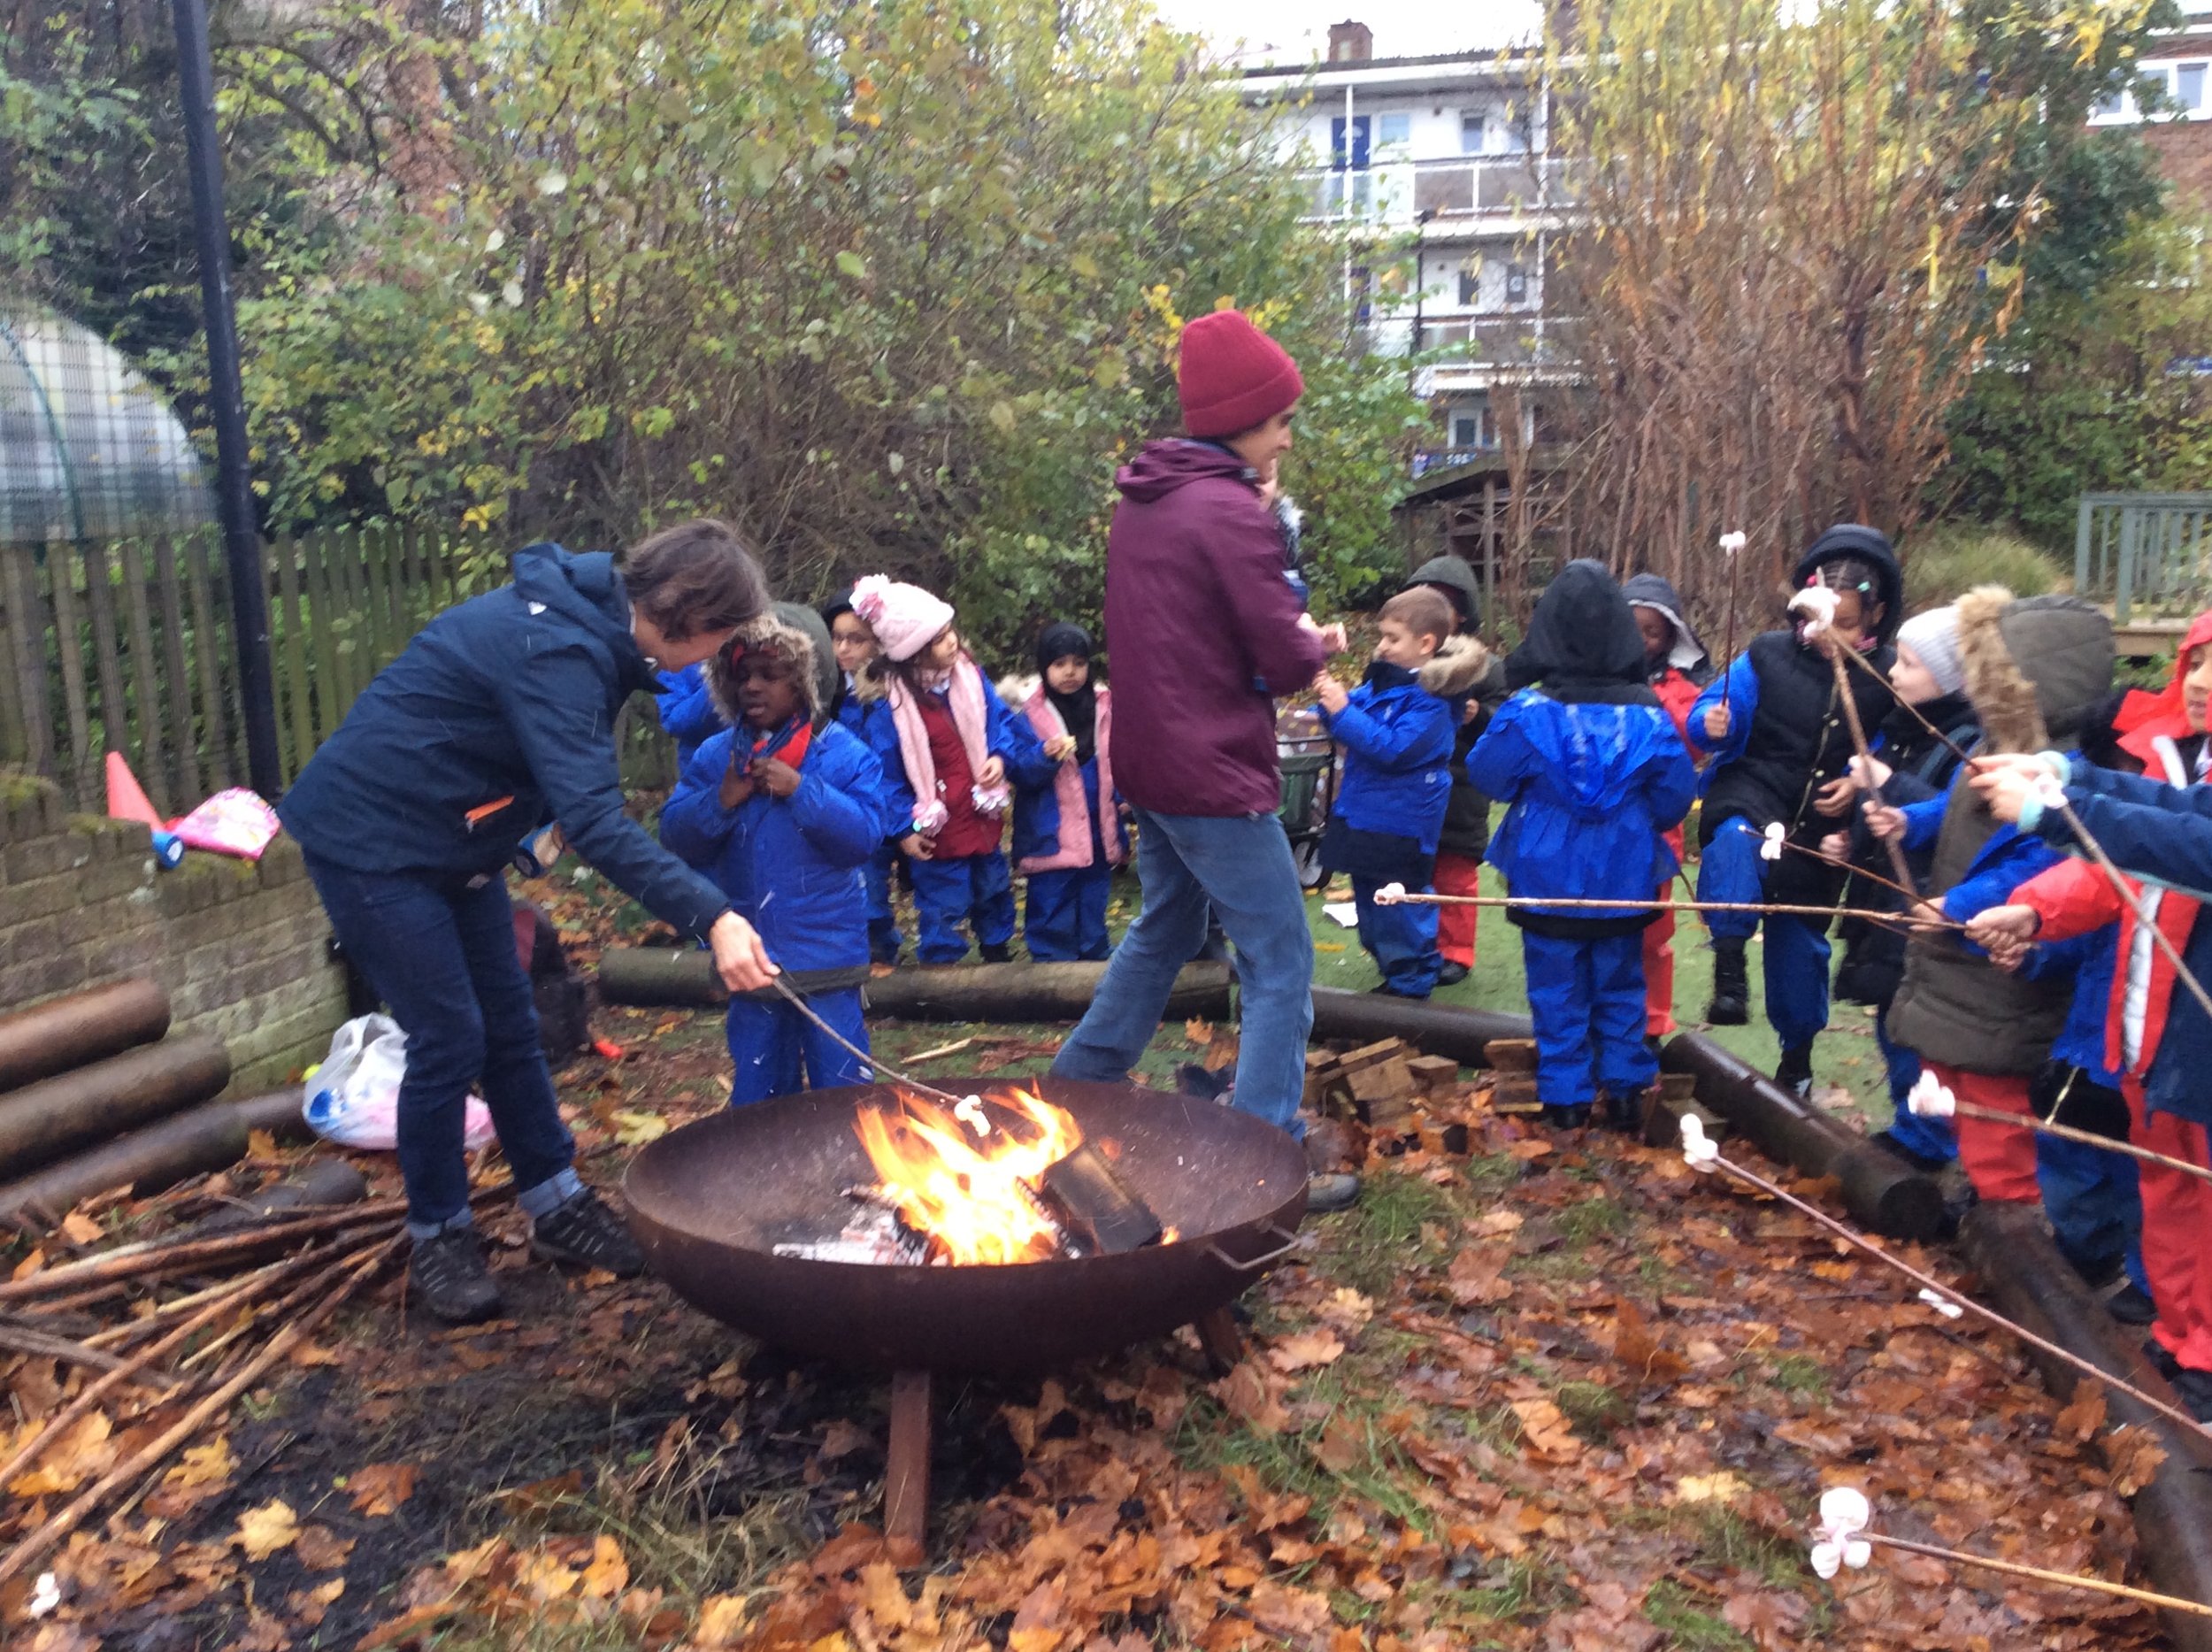 Forest School!